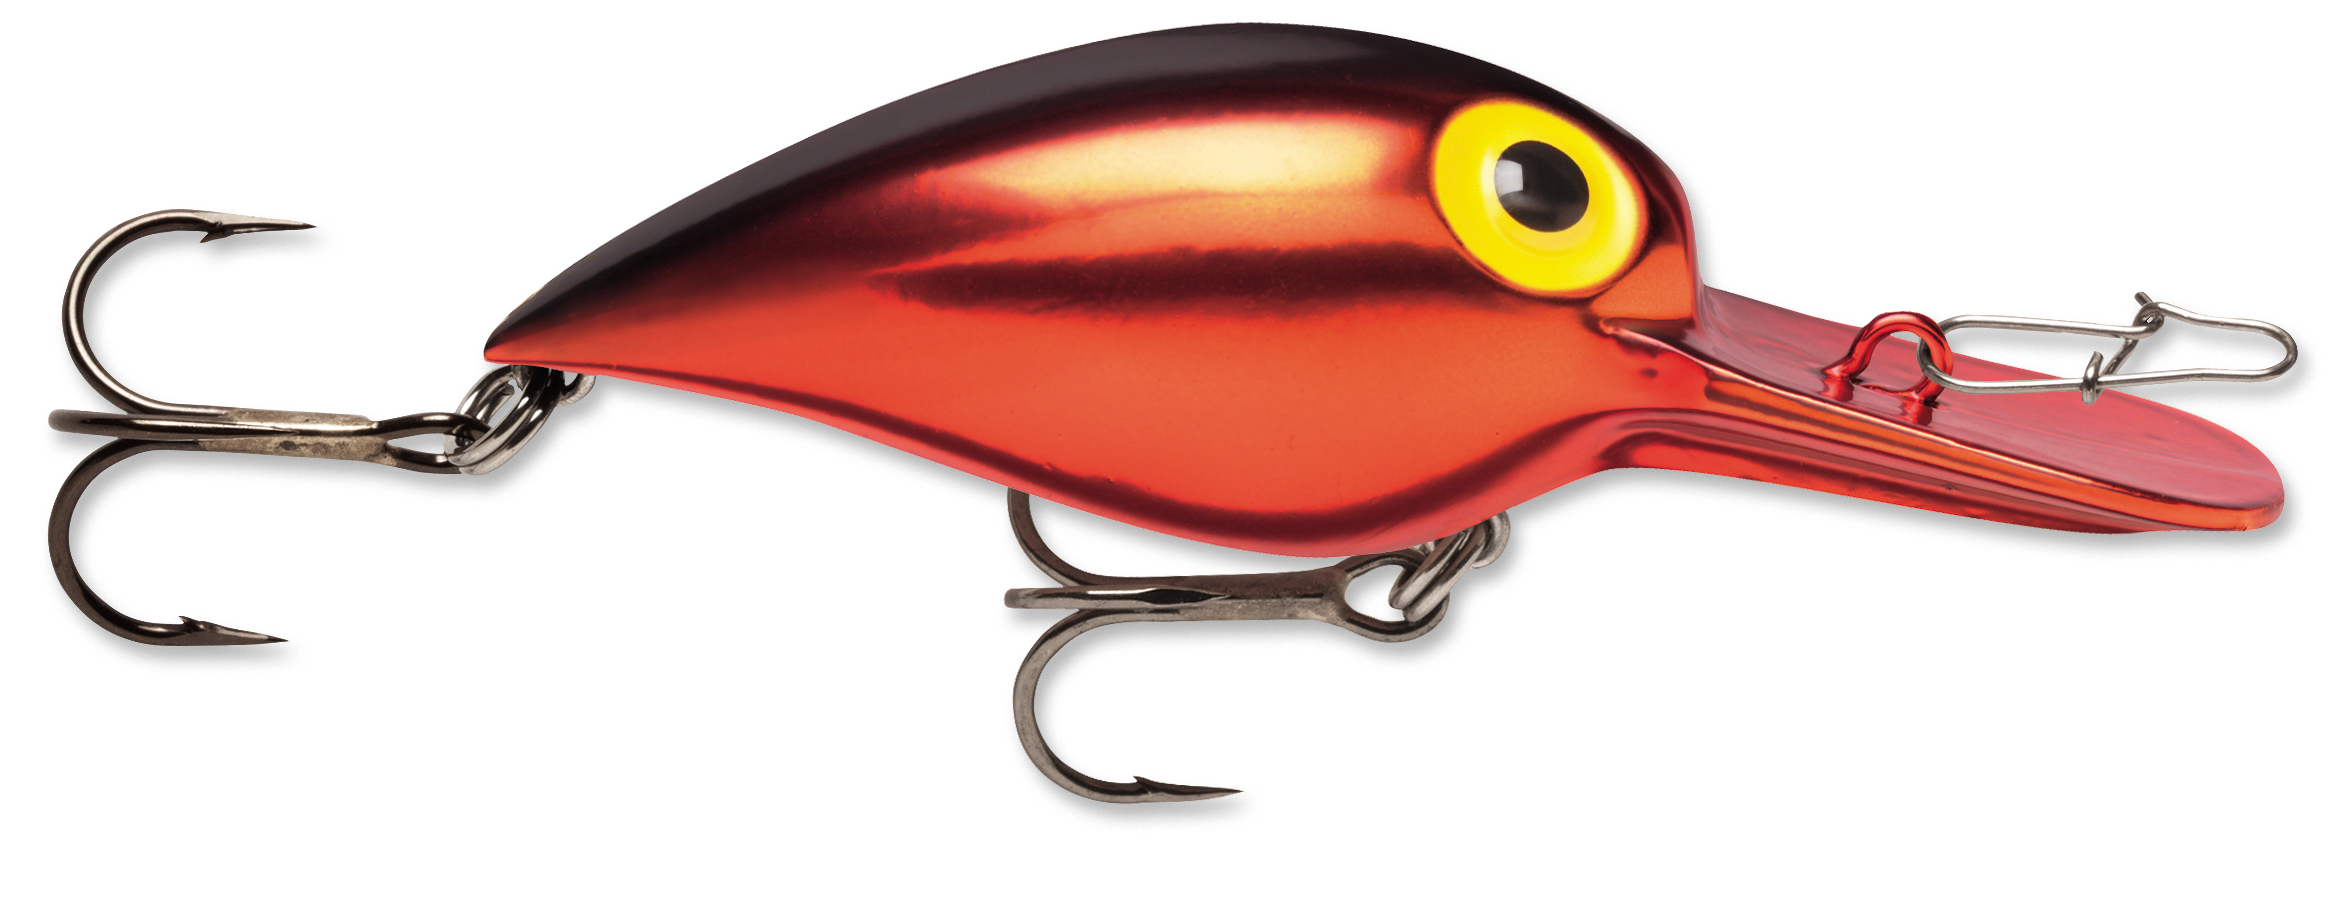 https://www.precisionfishing.com/img/products/023/023%2007813%20Storm%20Original%20Wiggle%20Wart%2005%20-%20Metallic%20Red%20with%20Black%20Back.jpg